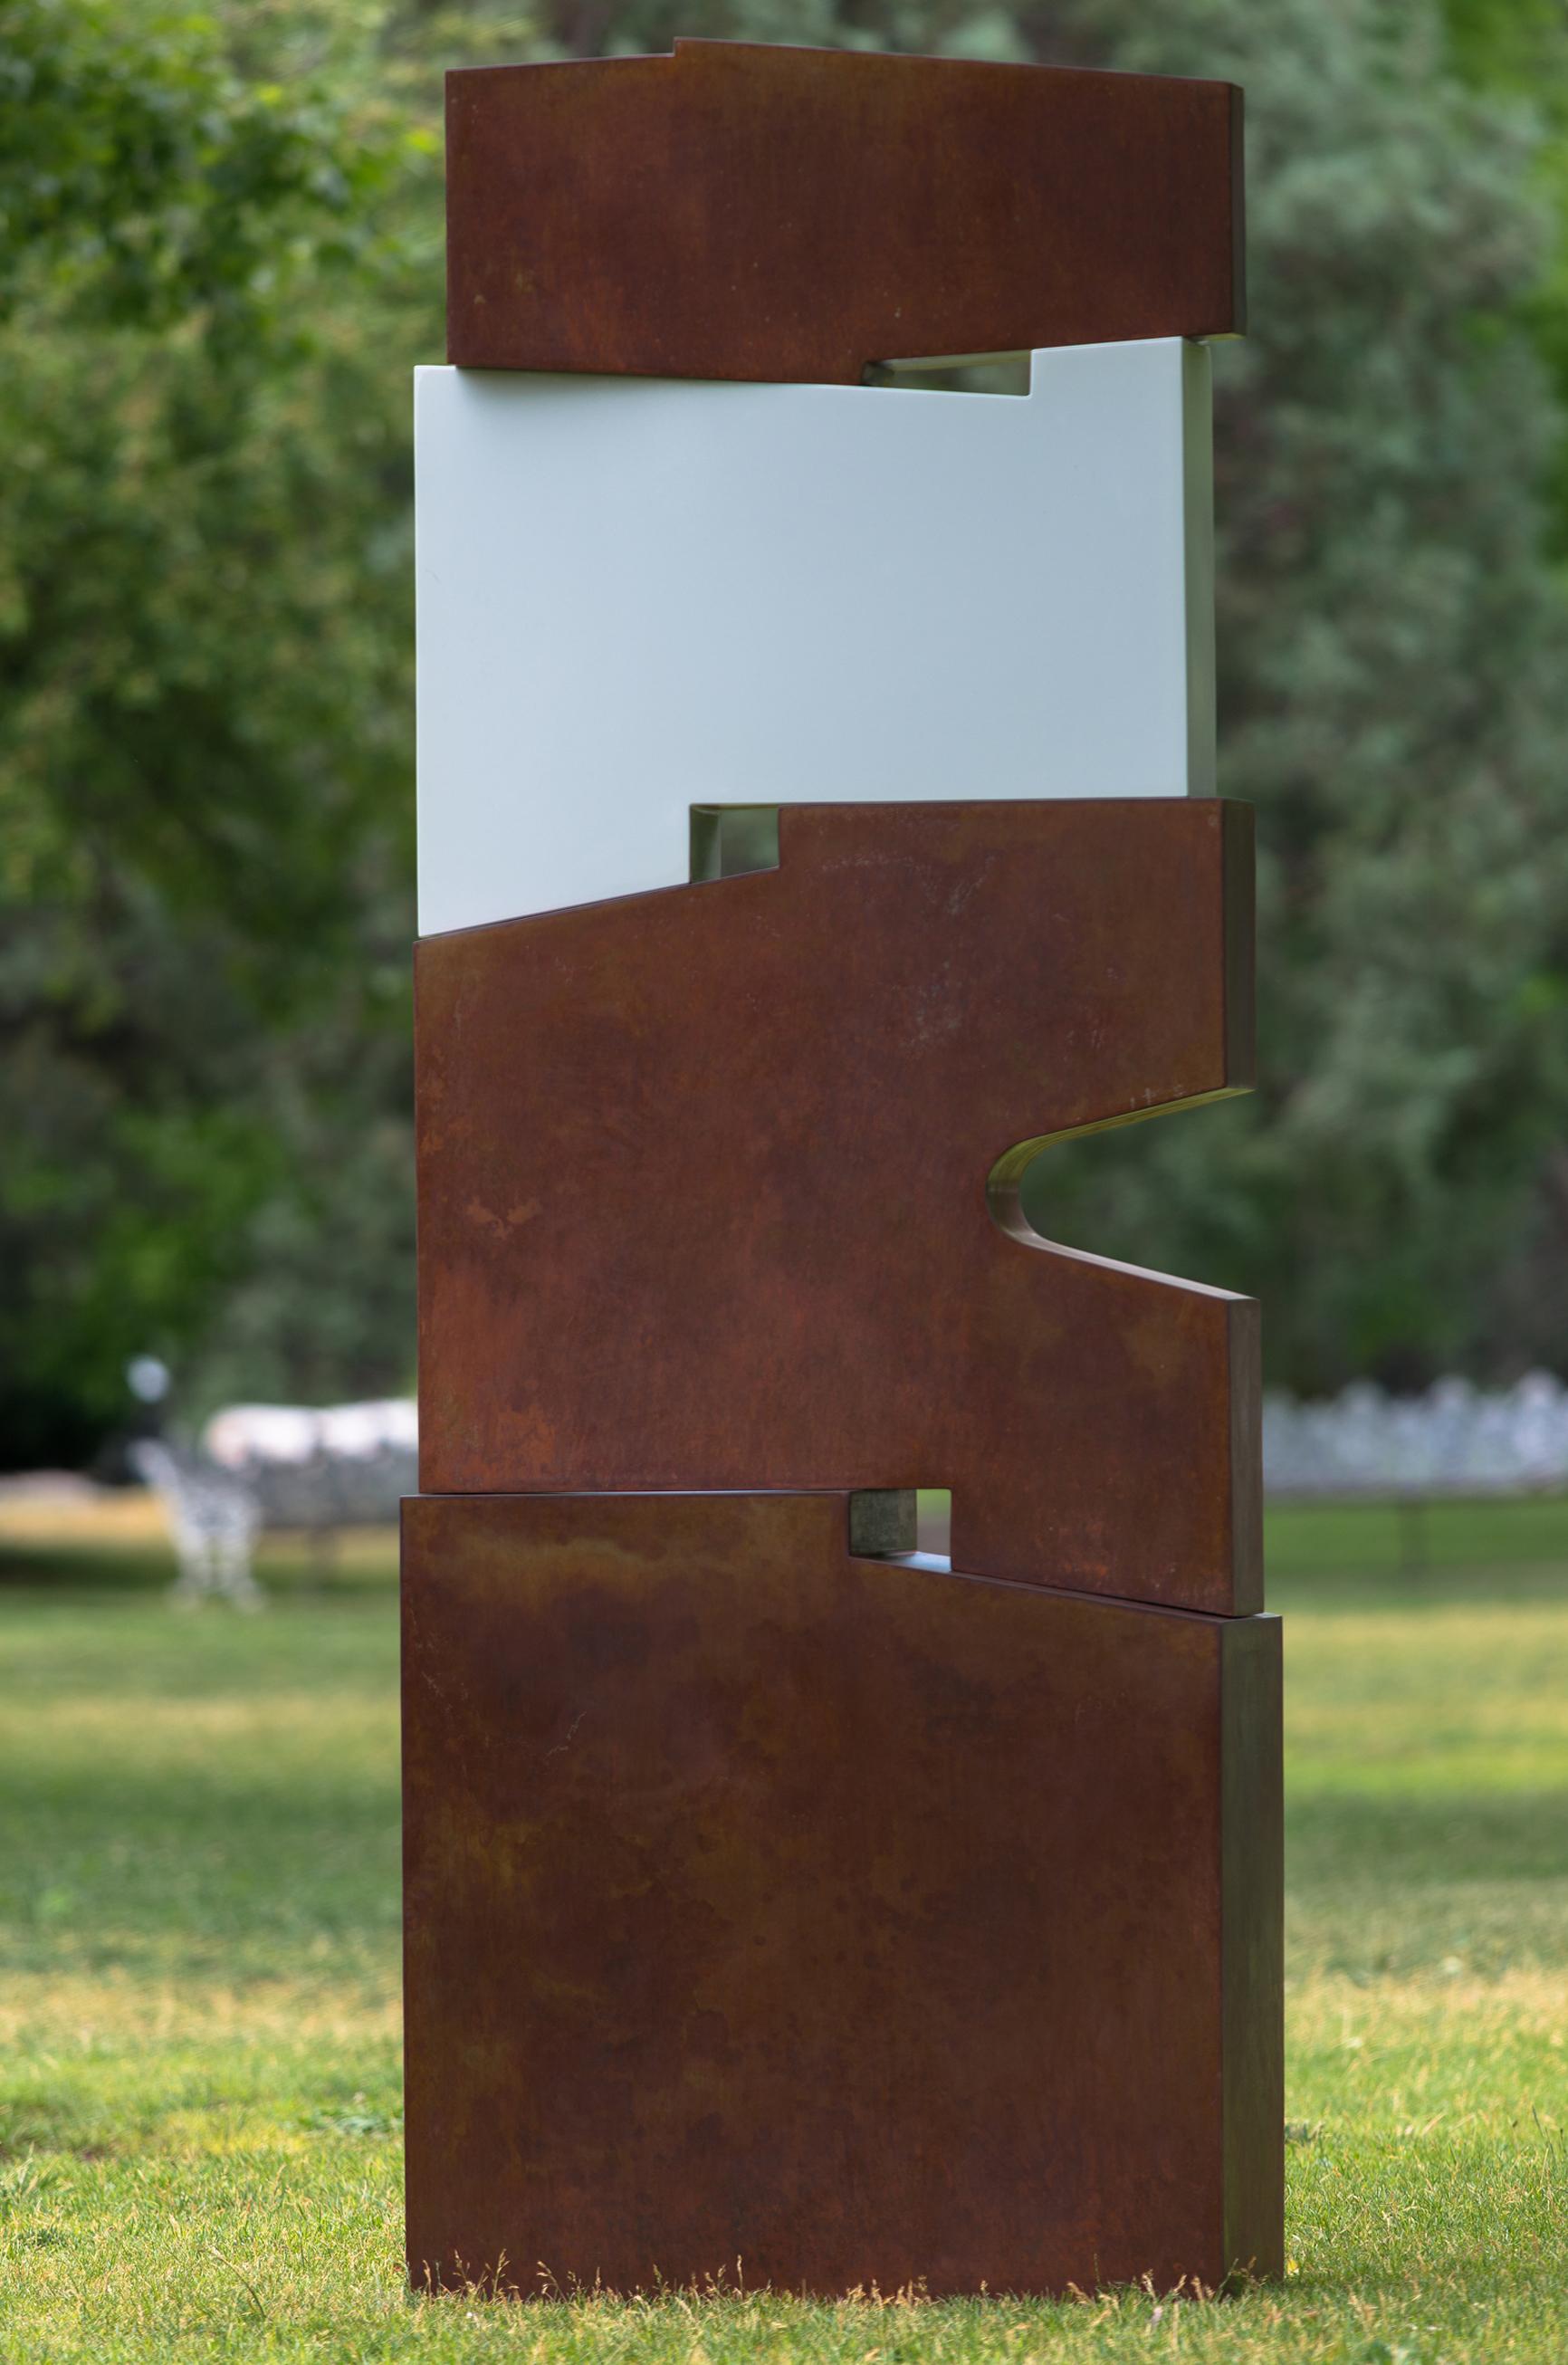 Pascal Pierme Abstract Sculpture - Tall outside sculpture, geometric abstract steel sculpture, steel and white